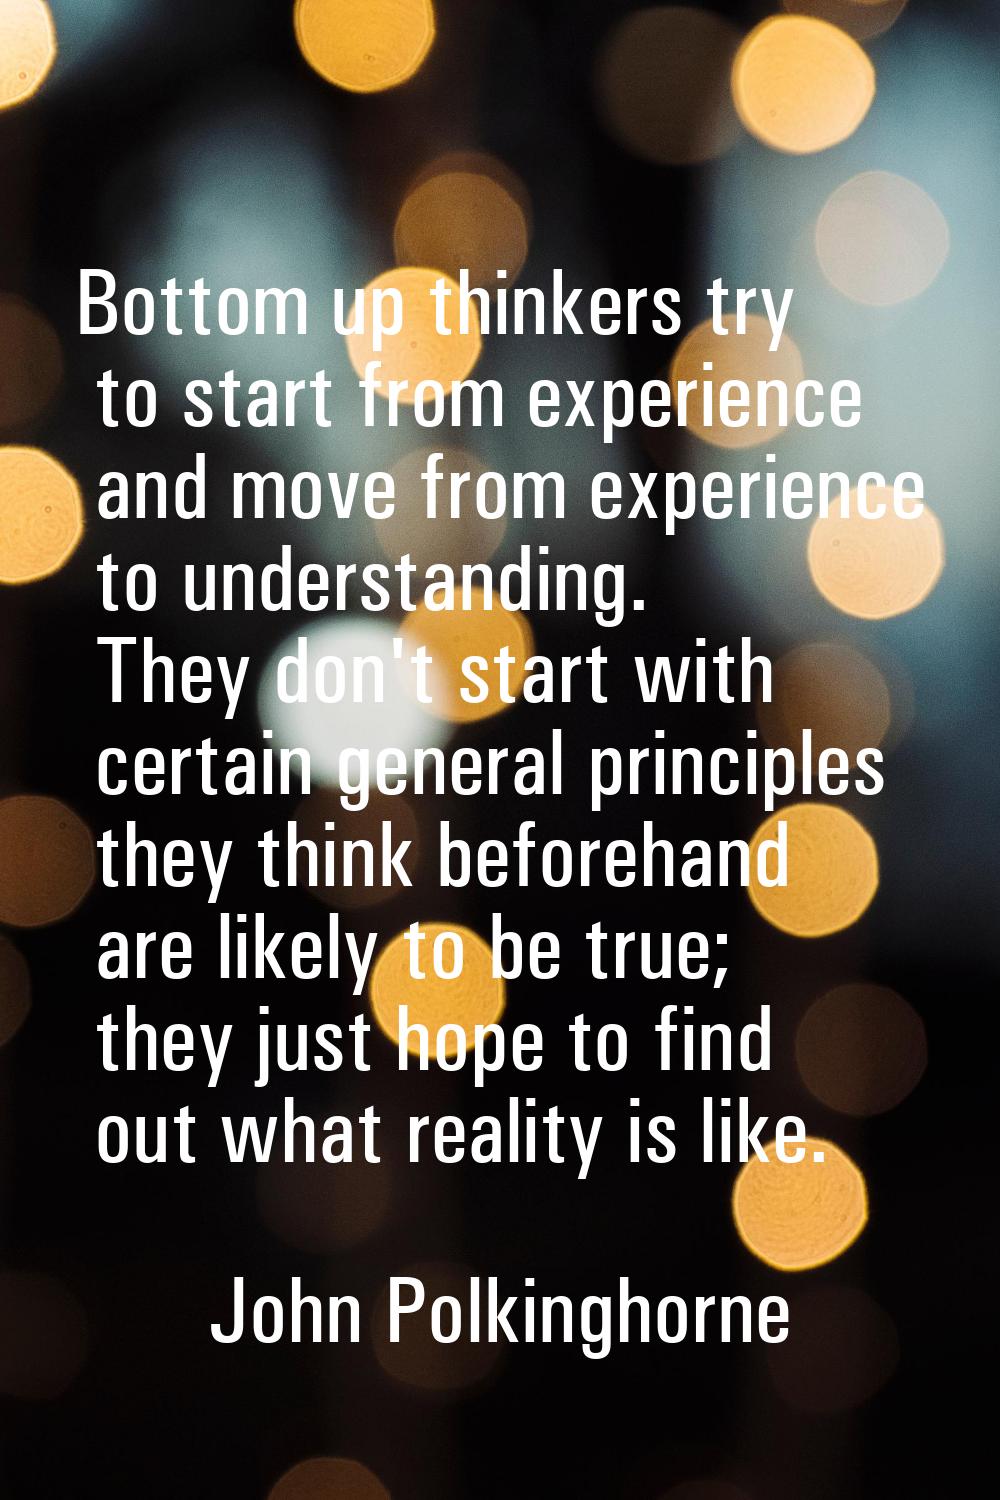 Bottom up thinkers try to start from experience and move from experience to understanding. They don